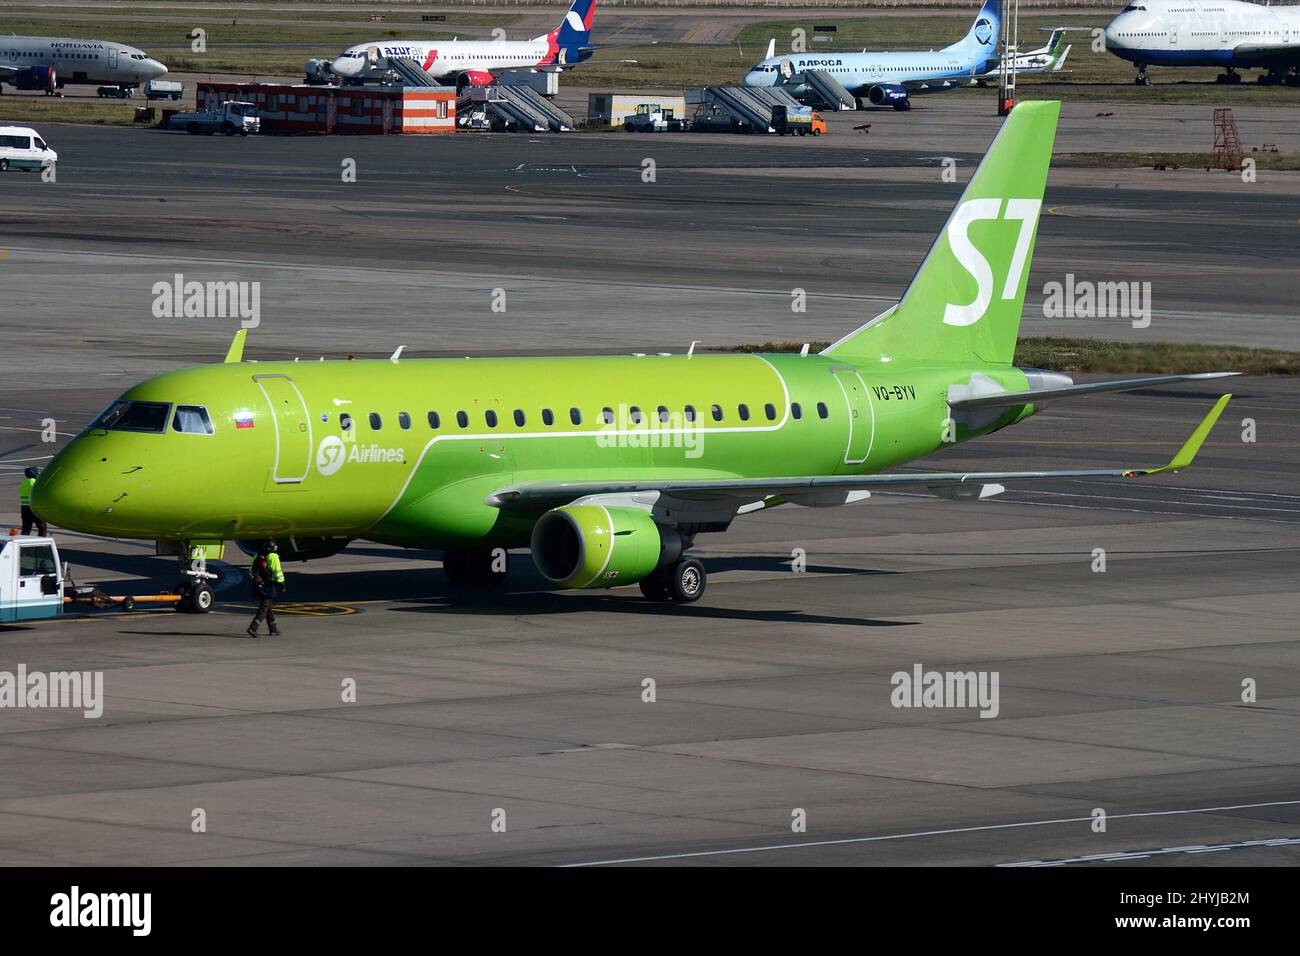 SANCTIONS - DUE TO RUSSIAN INVASION OF UKRAINE RUSSIAN AIRLINES FORCED TO RE-REGISTER AIRCRAFT FROM BERMUDA TO RUSSIA. S7 AIRLINES EMBRAER ERJ-170SU. Stock Photo